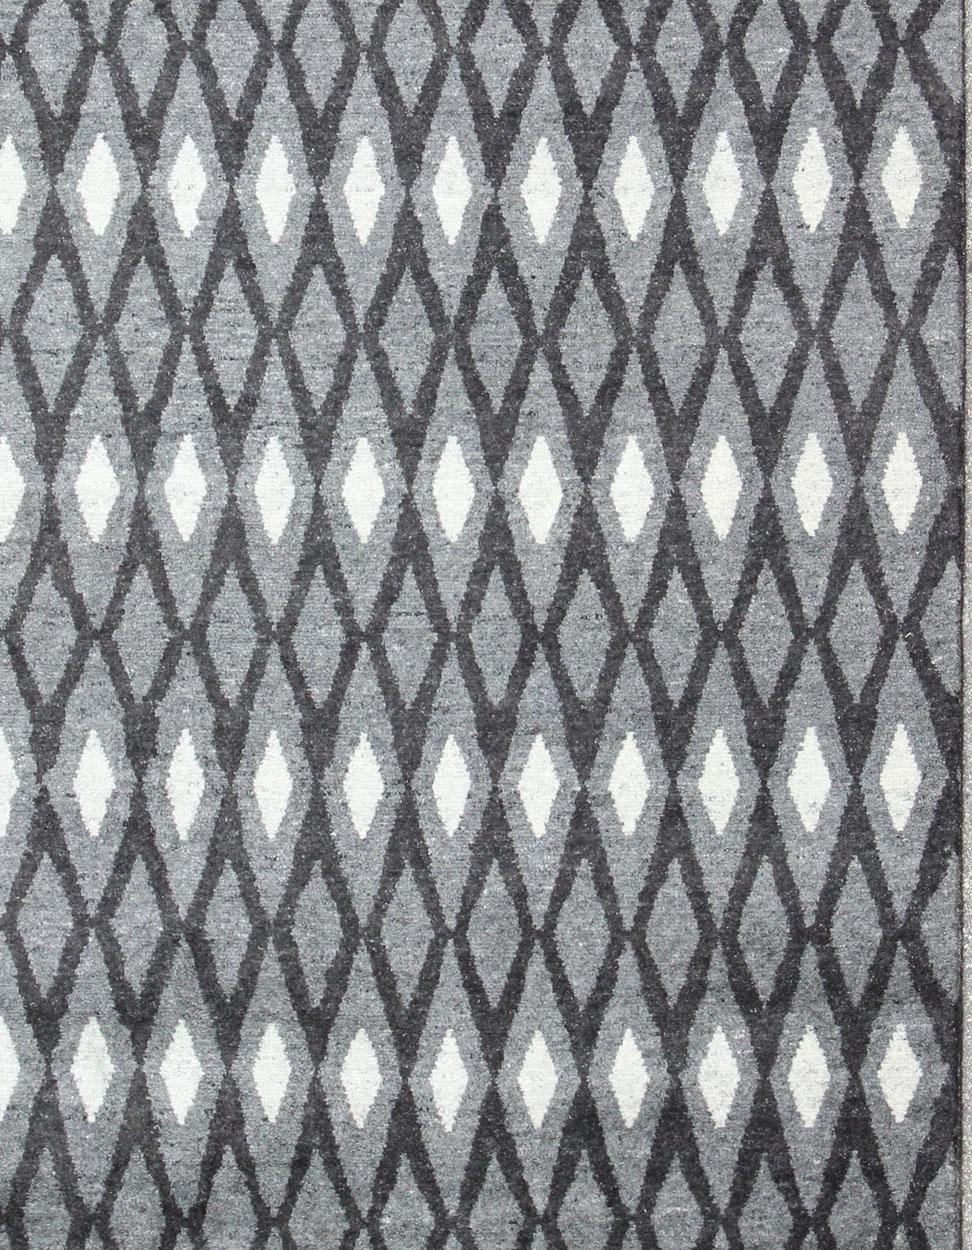 Tribal Keivan Woven Arts Moroccan Hand-Knotted Wool Area Rug in Gray Diamond Design For Sale